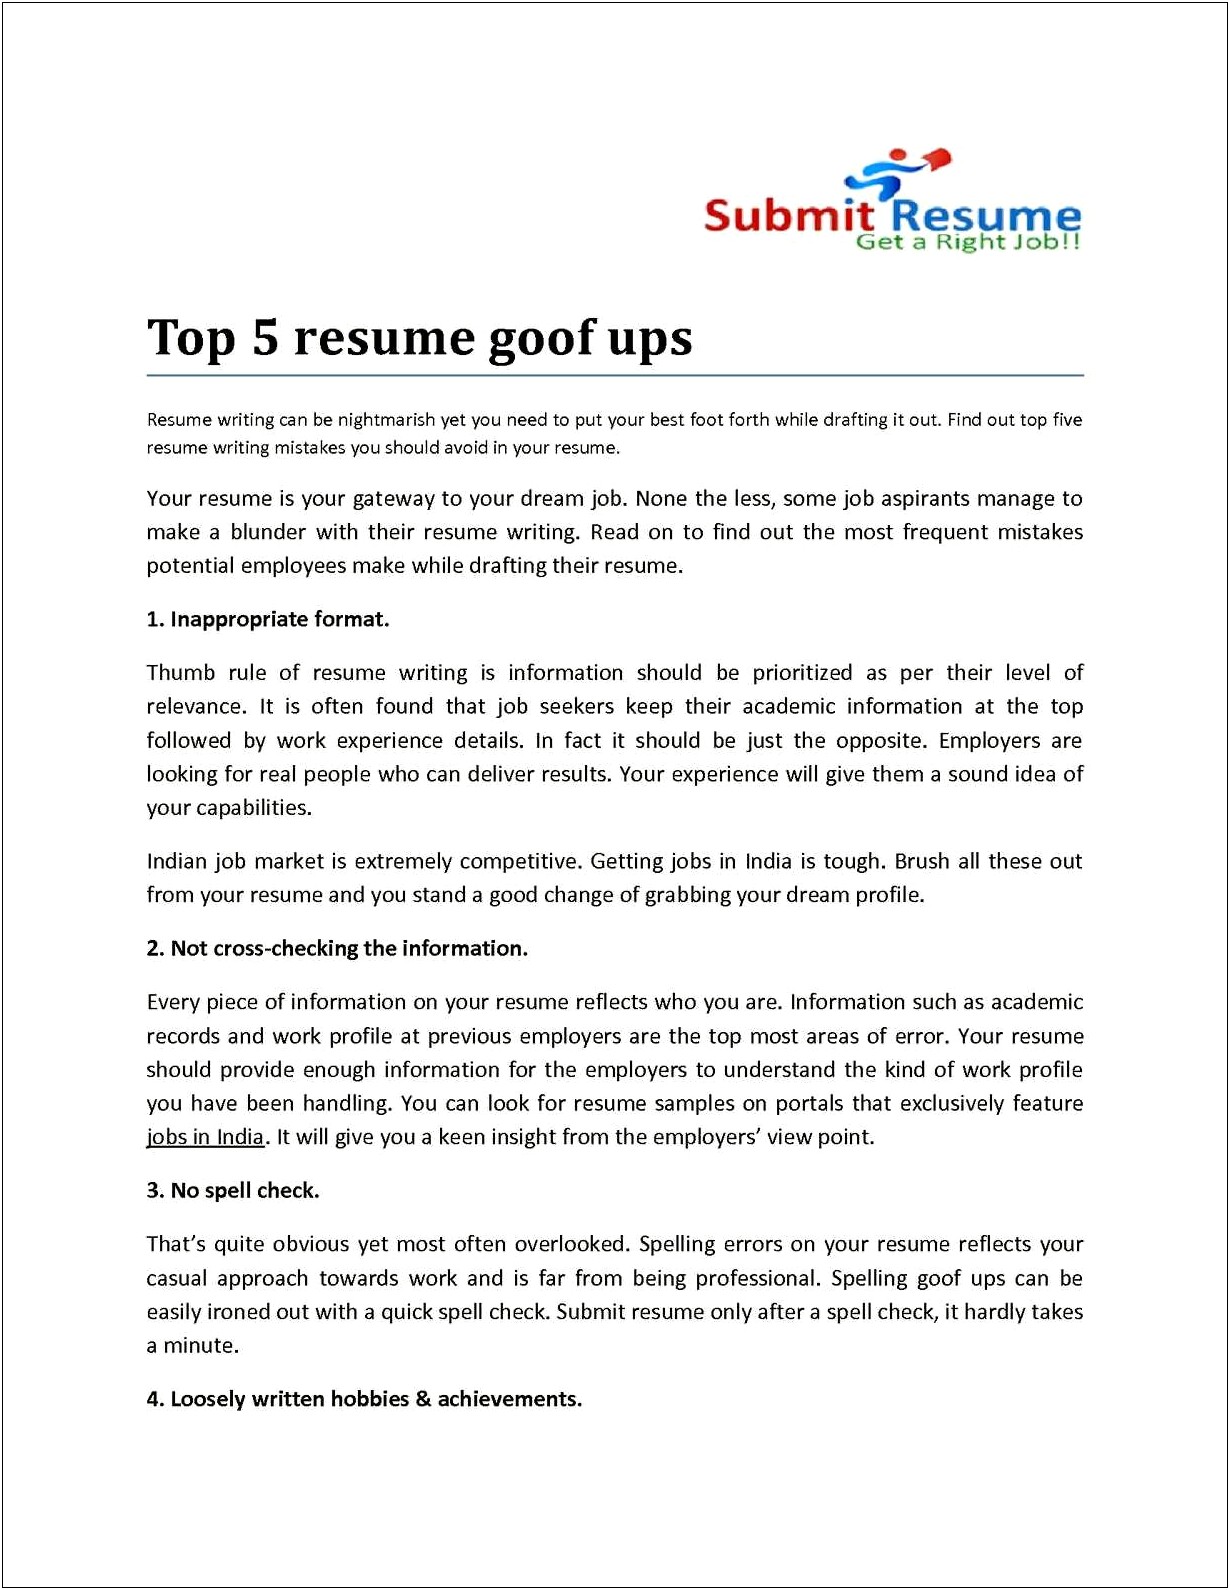 Resume Writing For Many Changed Jobs